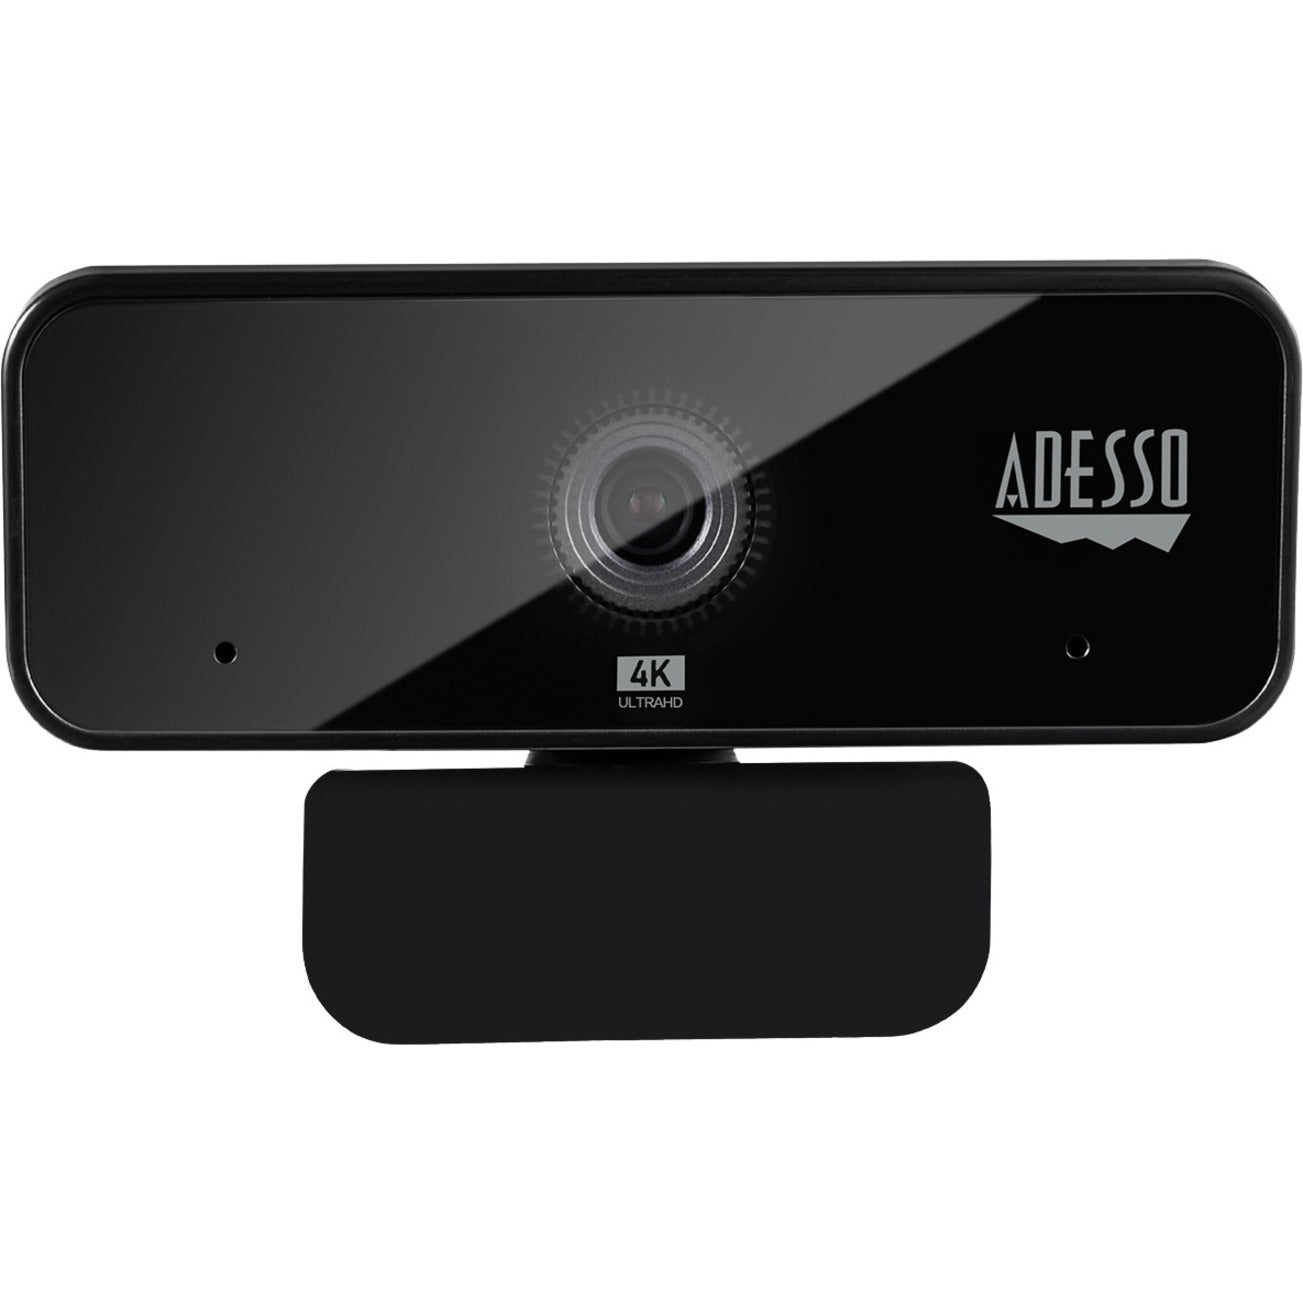 Adesso CYBERTRACK H6 4K Ultra HD USB Webcam with Built-in Dual Microphone & Privacy Shutter Cover